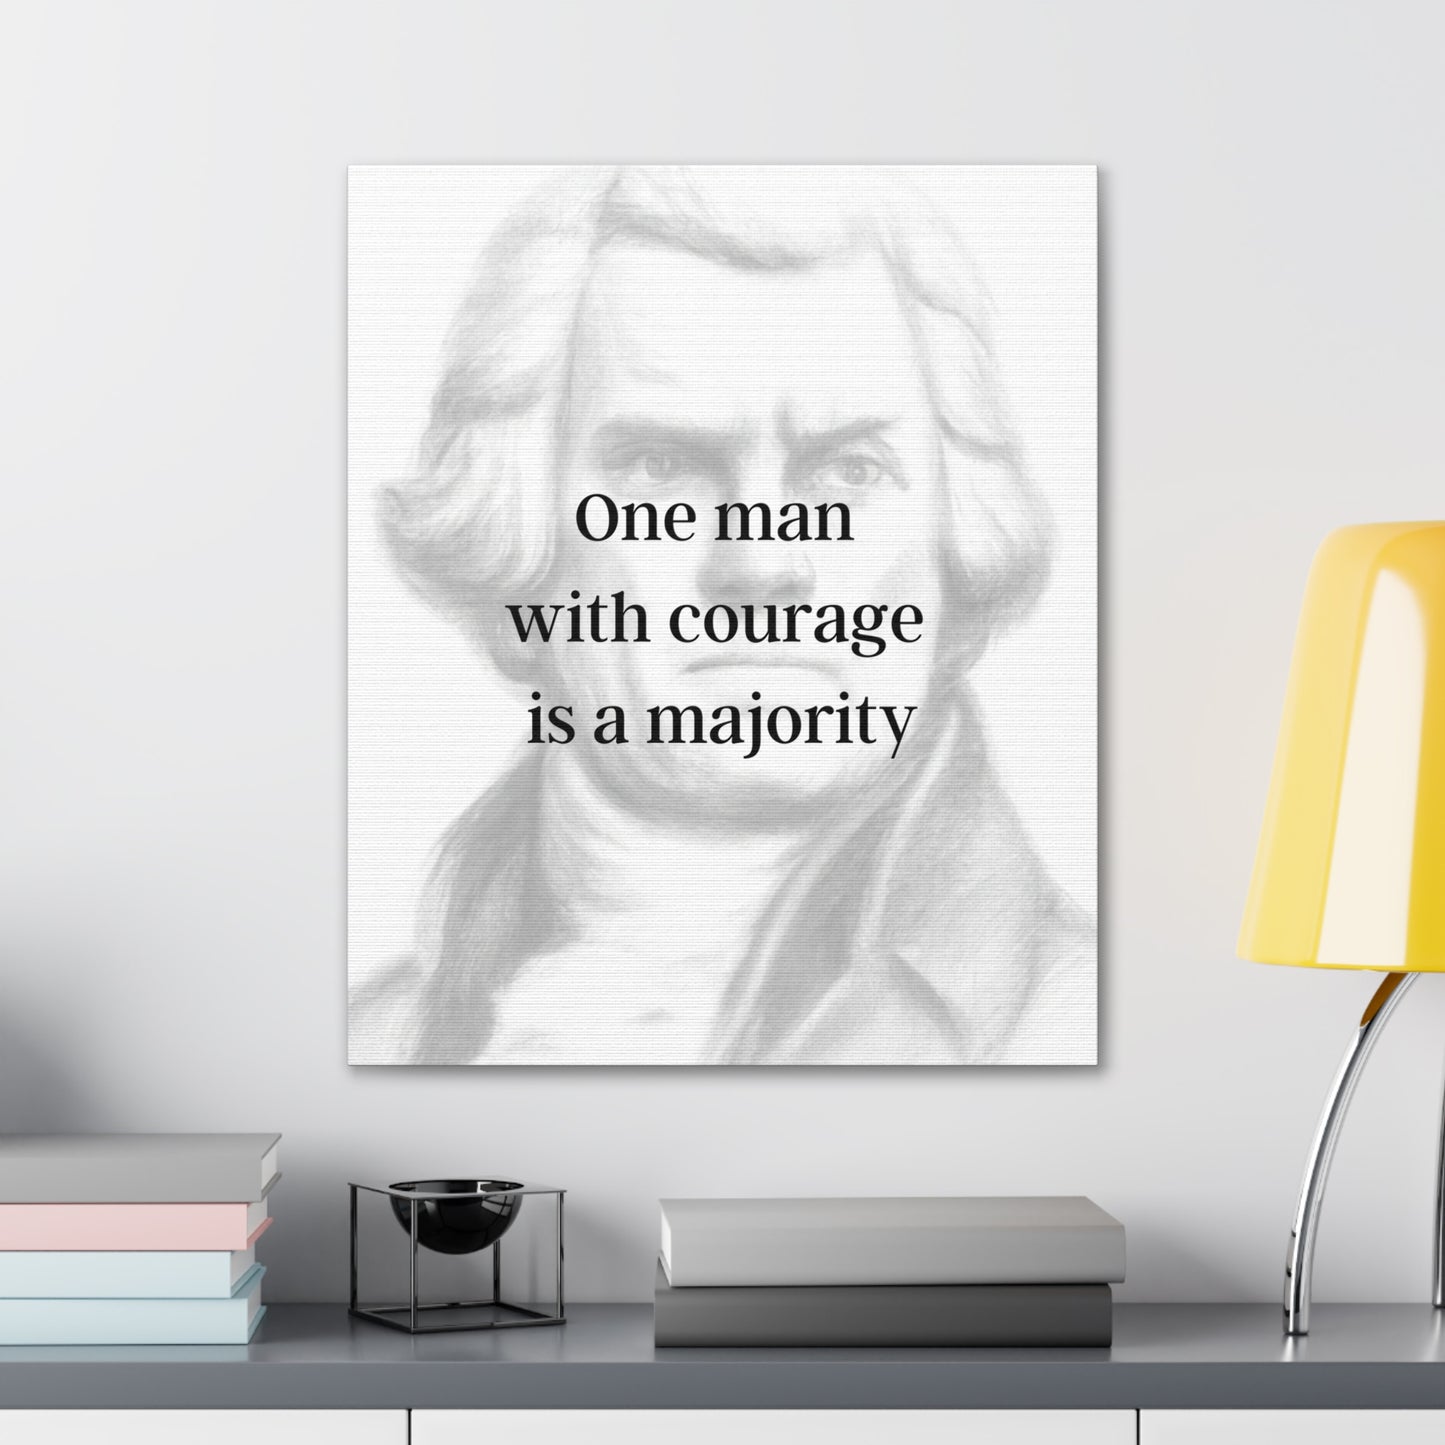 Thomas Jefferson Quote 4, Canvas Art, Light Print, 3rd President of the United States, American Patriots, AI Art, Political Art, Canvas Prints, Presidential Portraits, Presidential Quotes, Inspirational Quotes